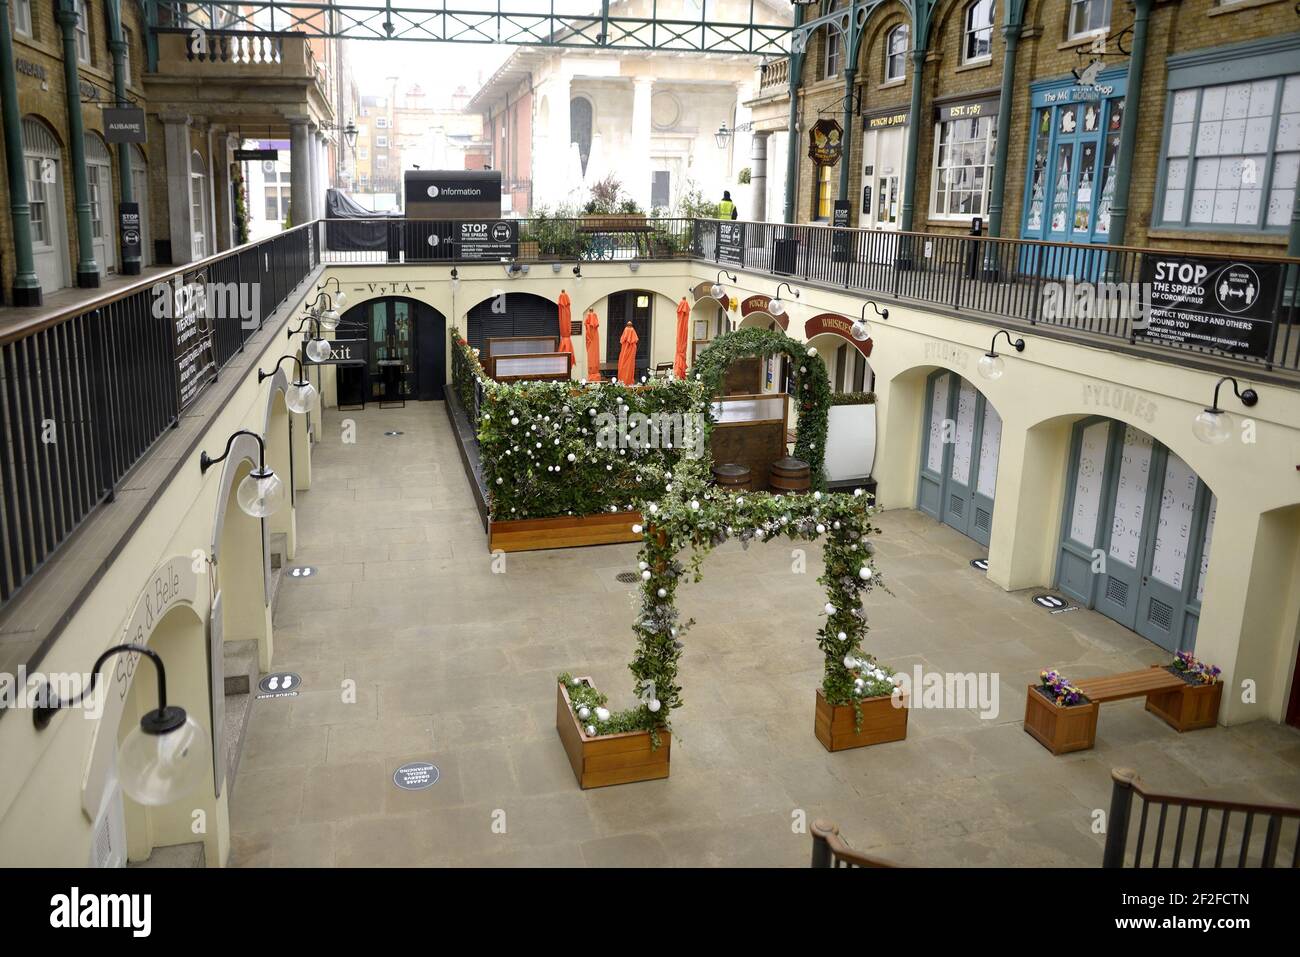 London, England, UK. Covent Garden market deserted during the COVID pandemic, March 2021 Stock Photo